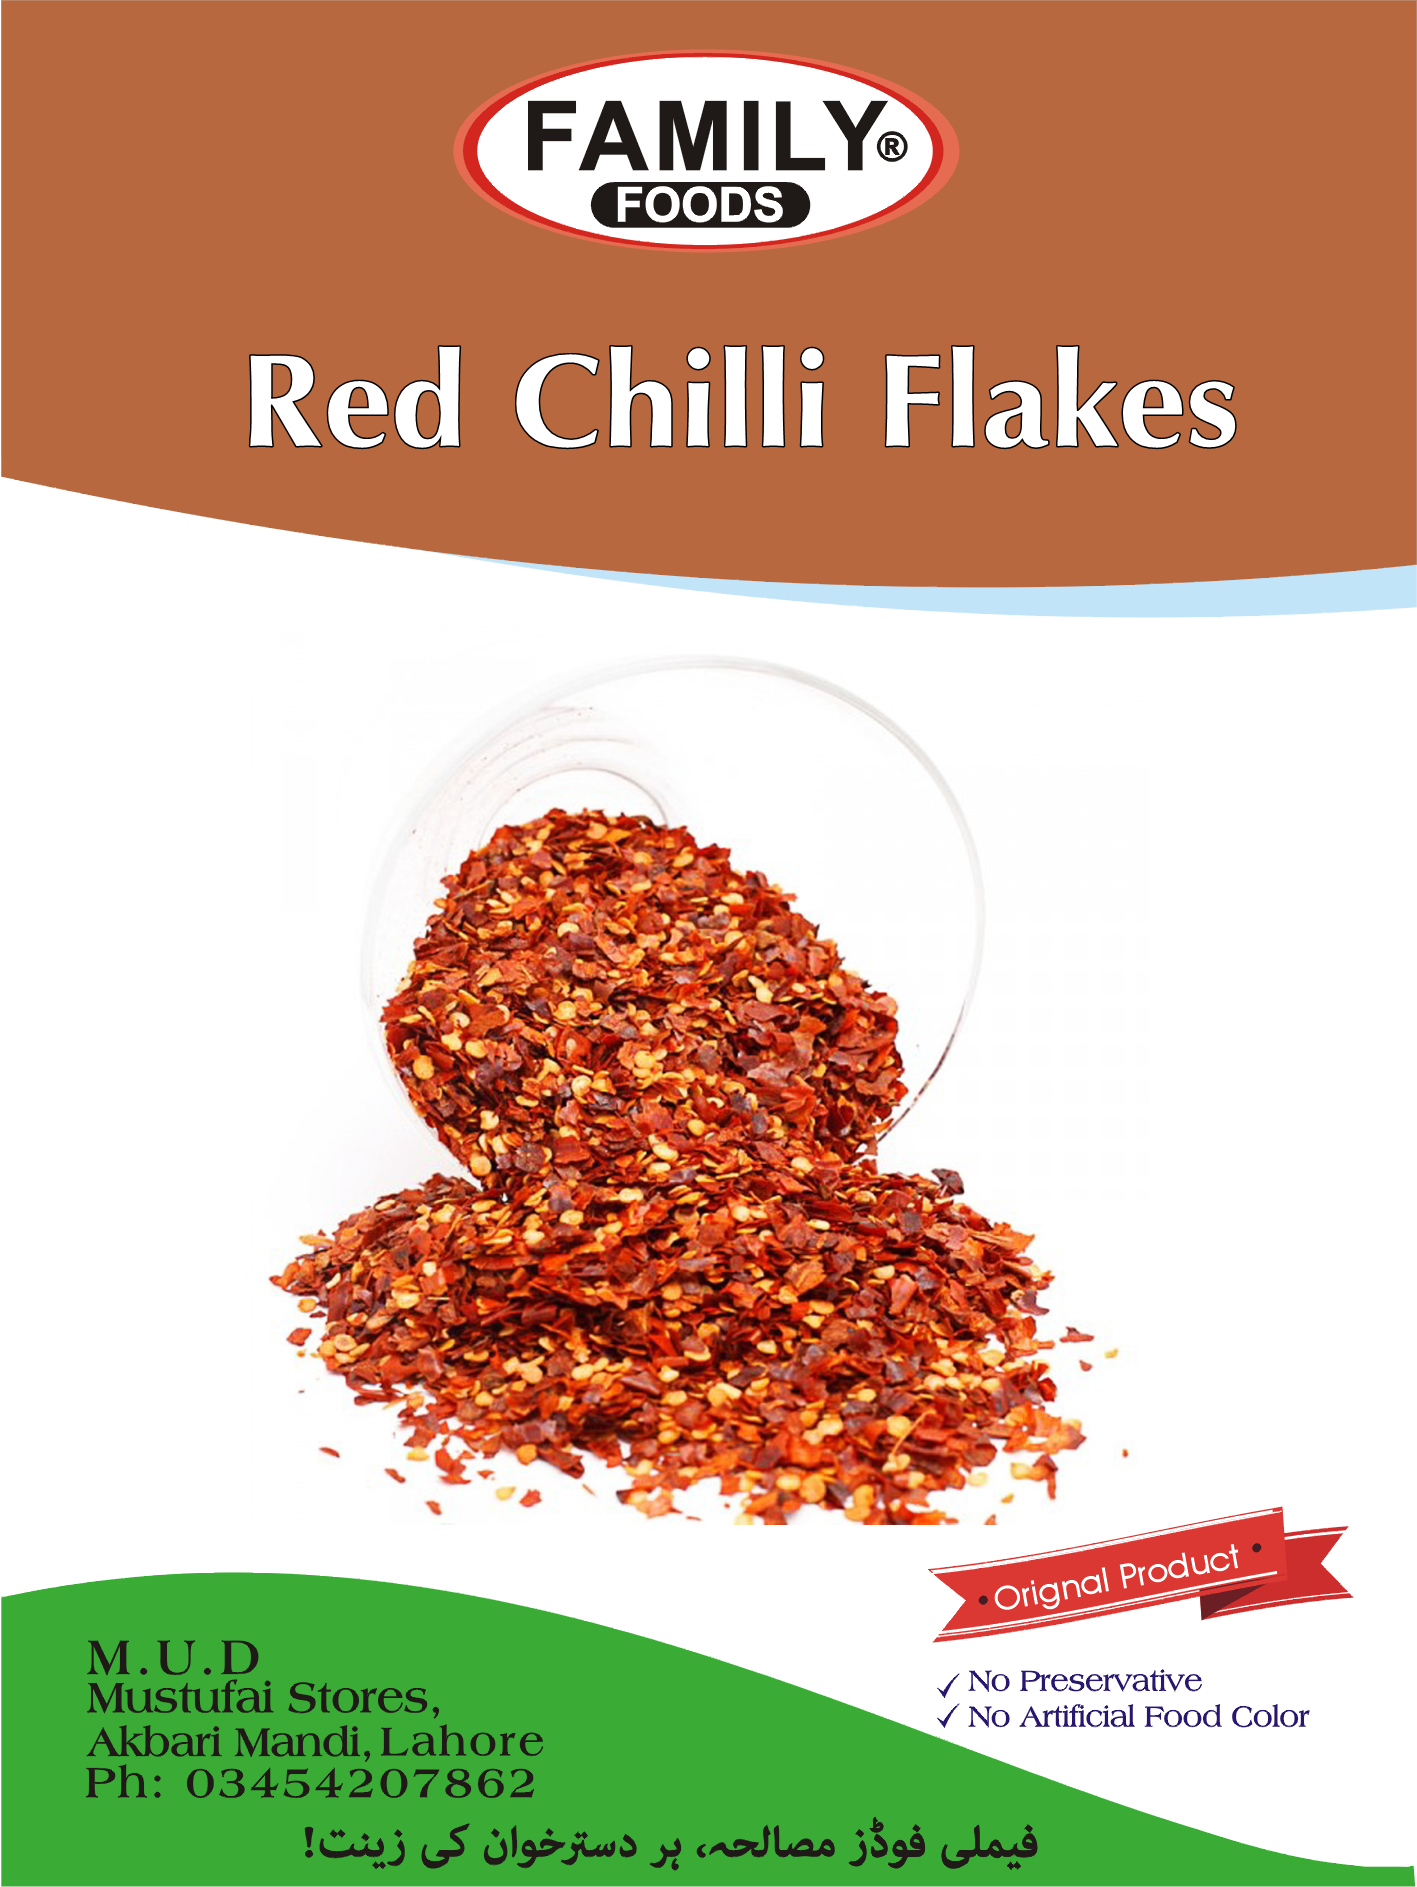 Red Chili Flakes (dara Laal Mirch)